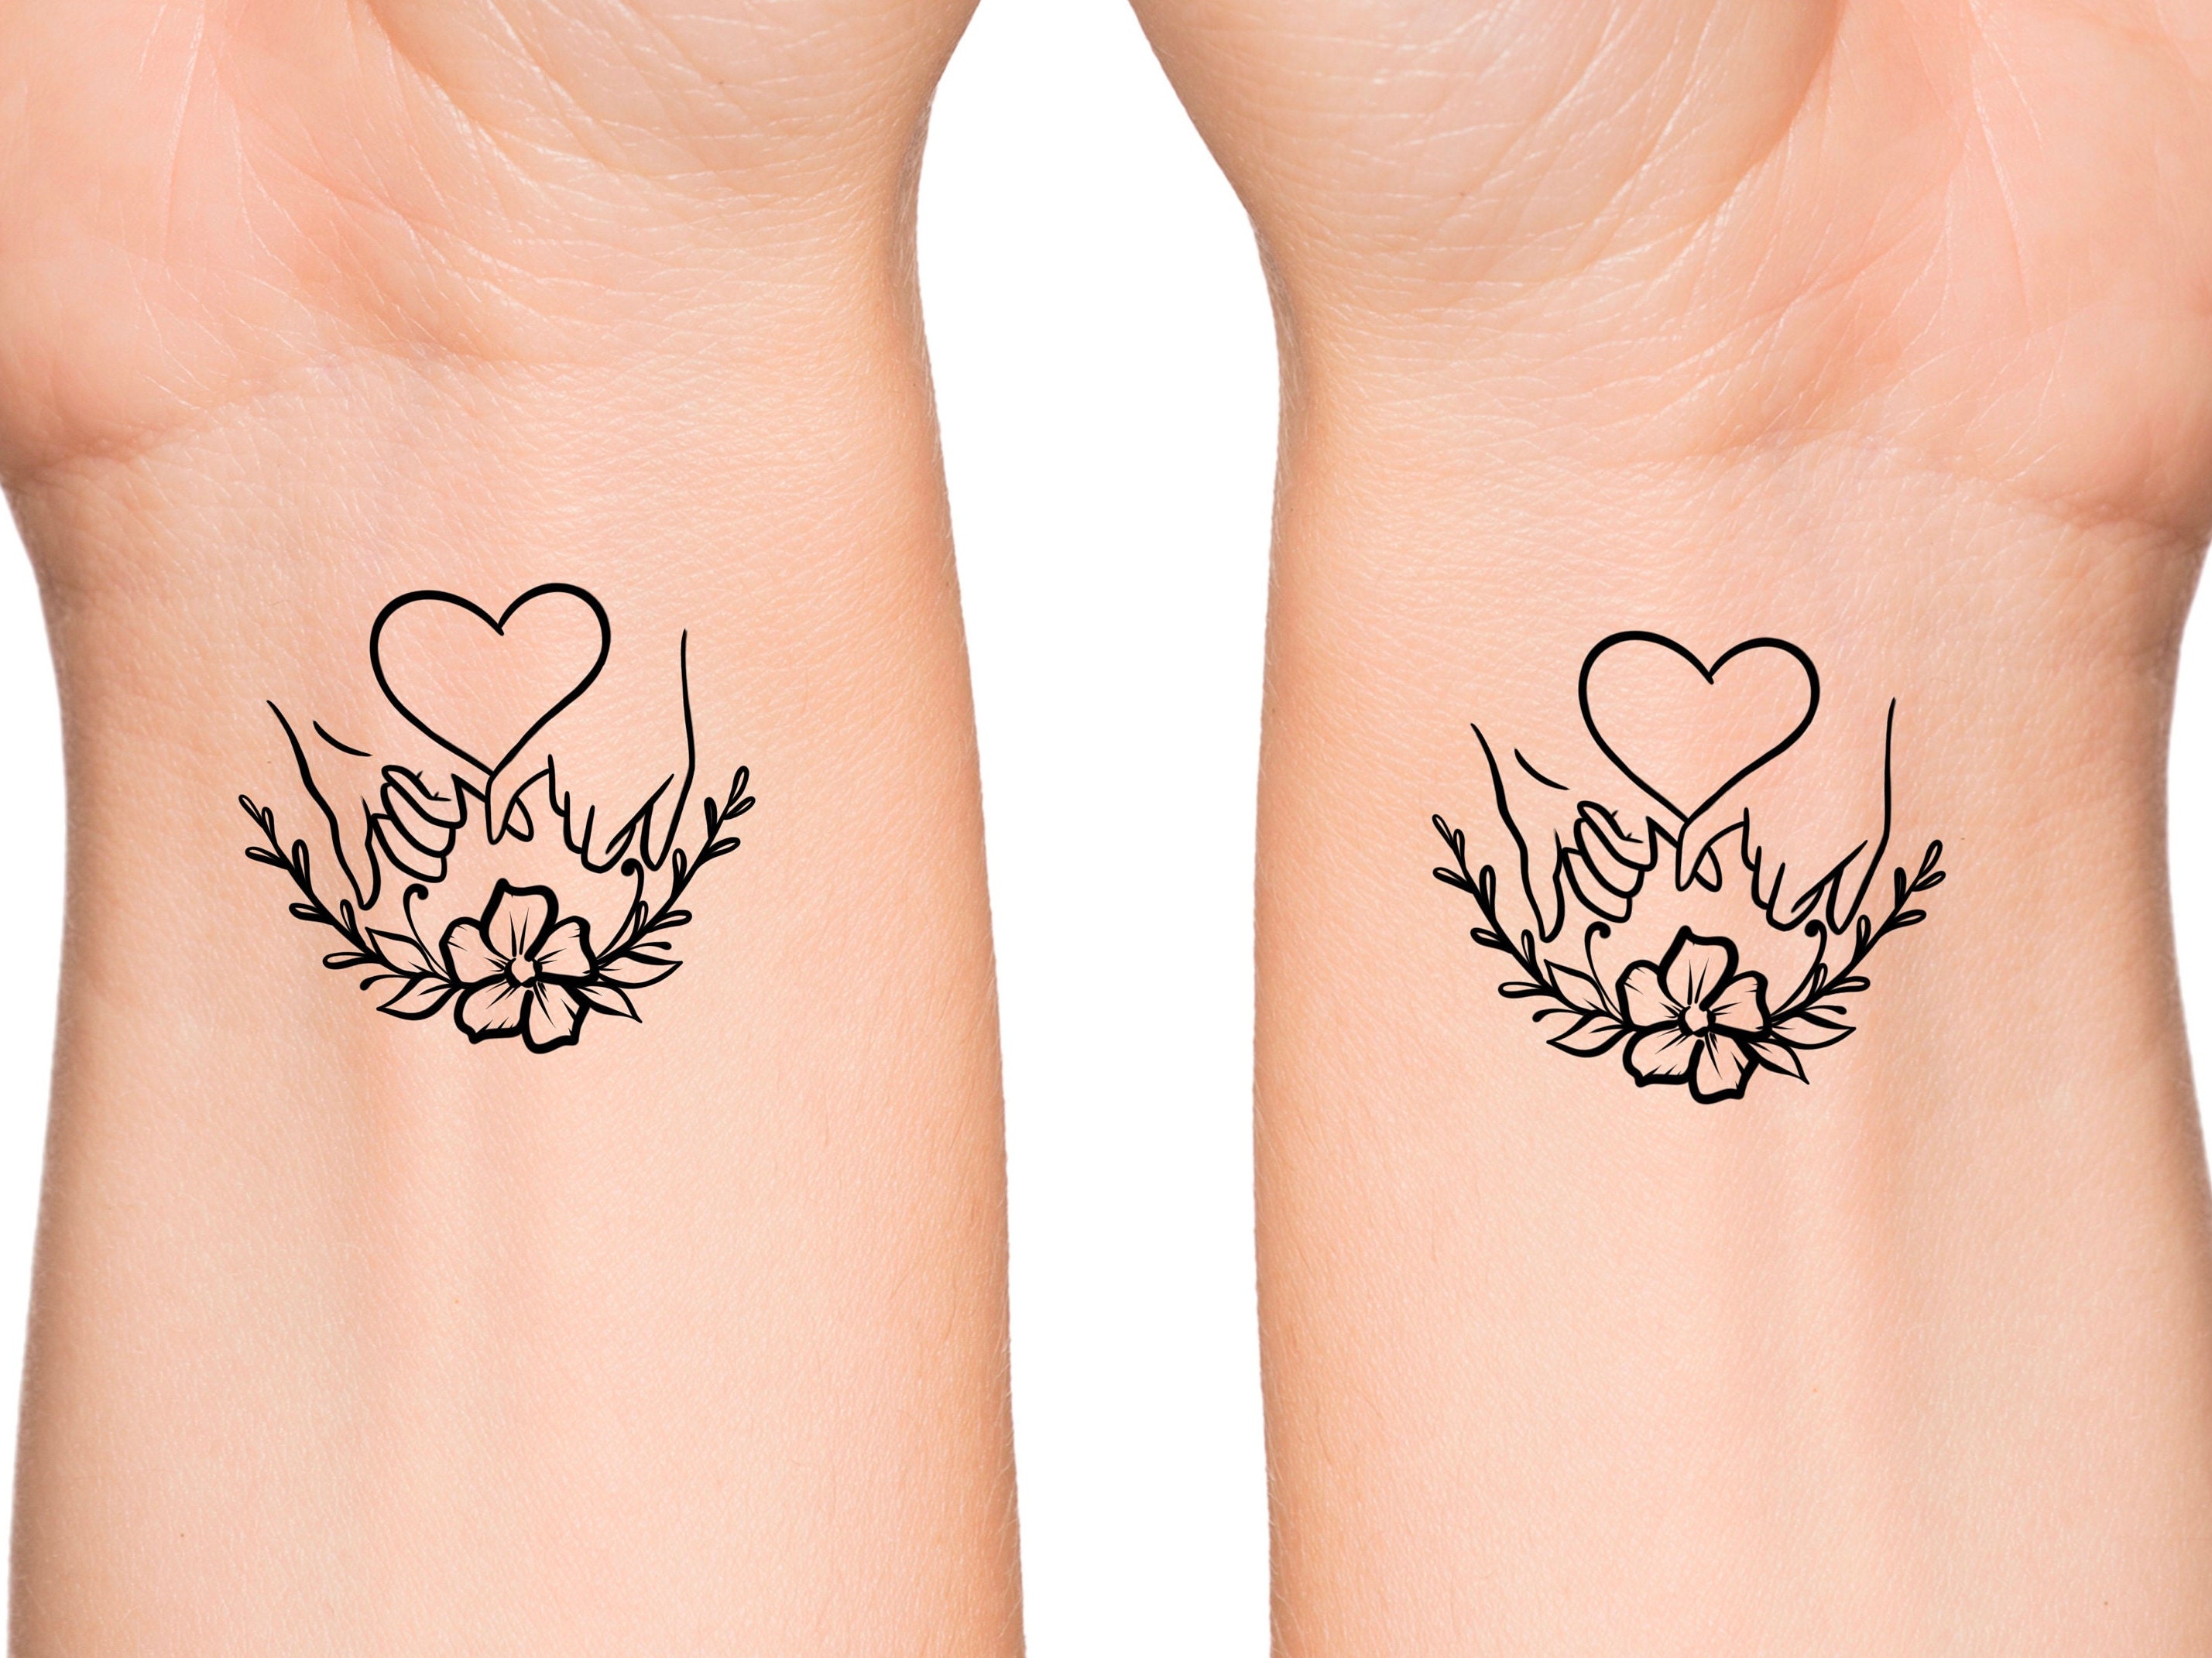 2 Pinky Promise Temporary Tattoos / Matching Tattoo / Best